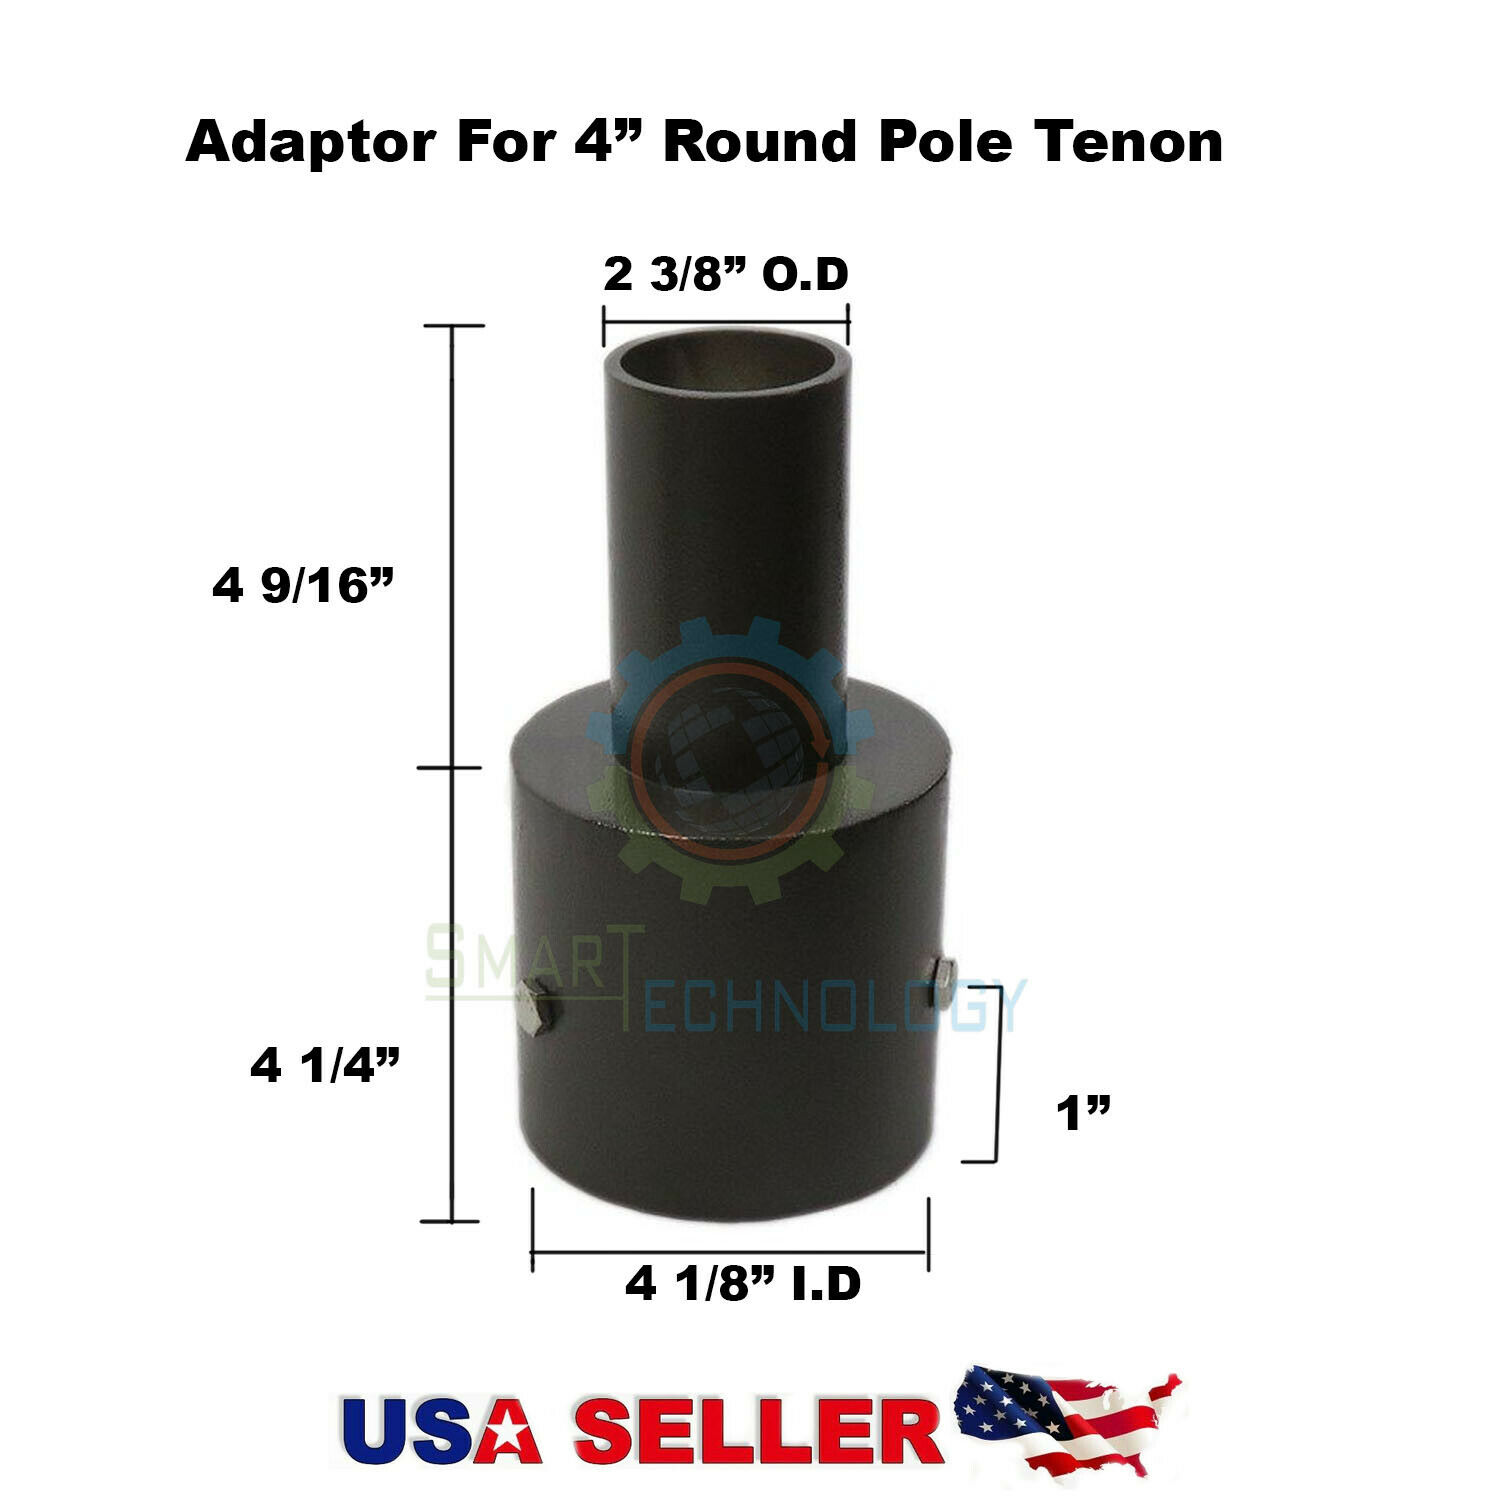 Adapter For 4" Inch Round Pole Tenon For Shoe Box Pole Parking Street Light Led